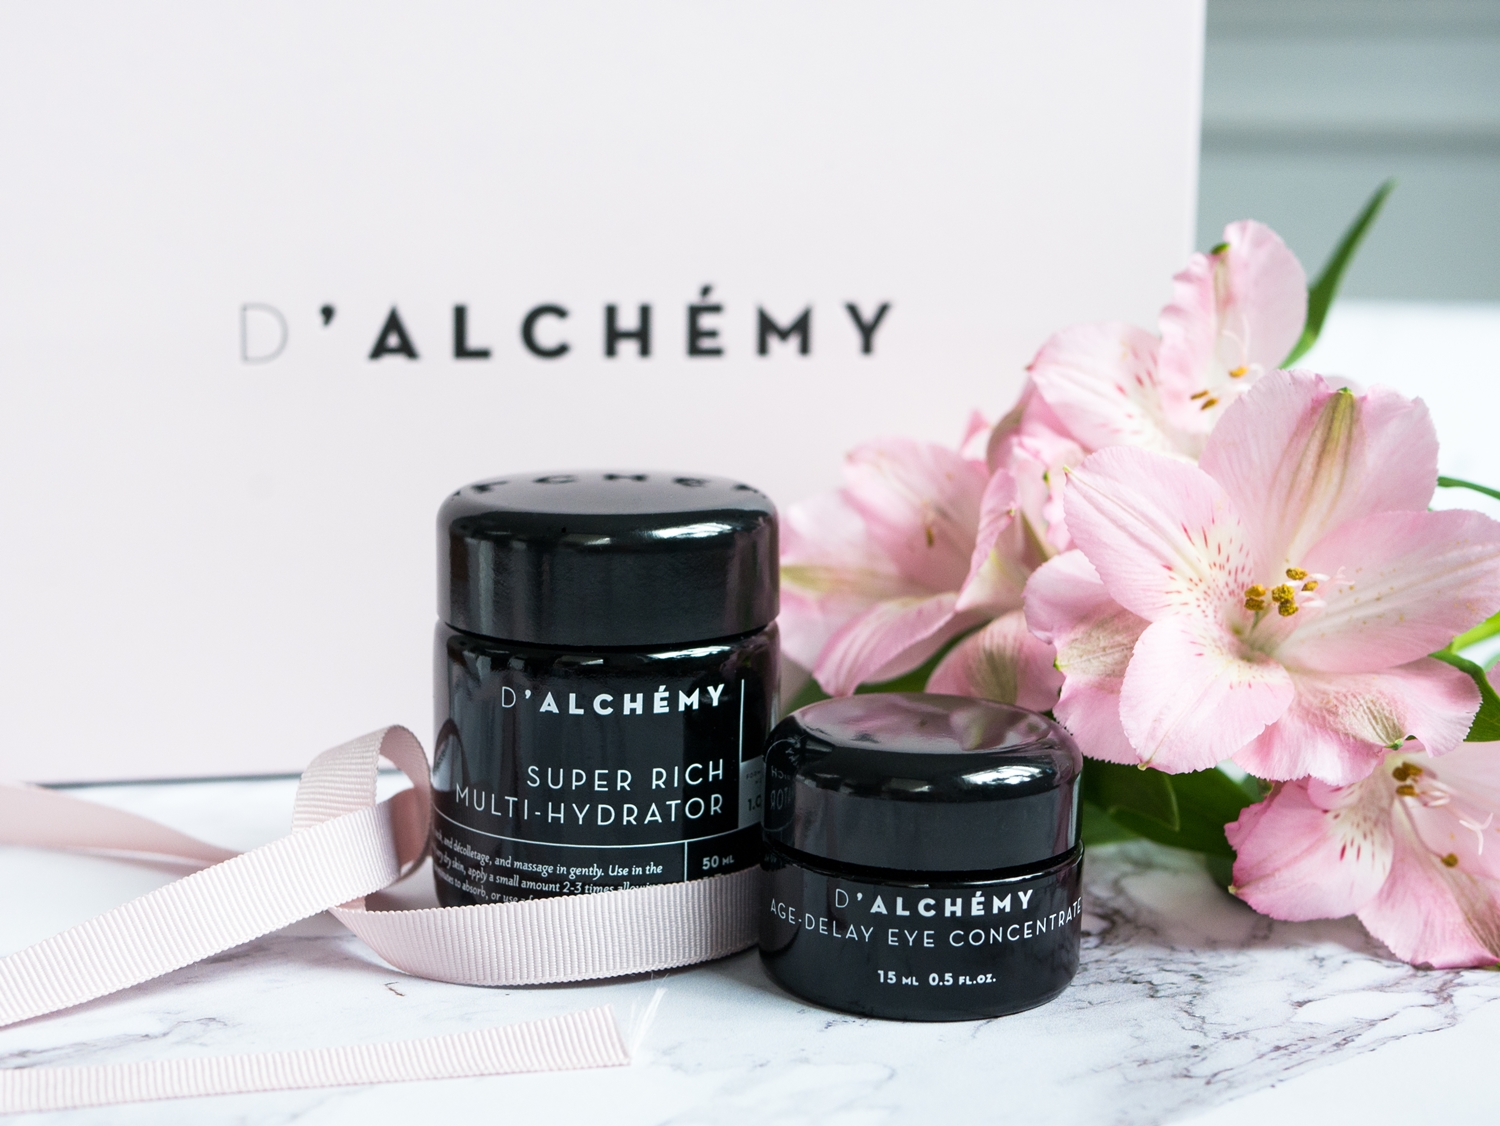 D’Alchemy Age Delay Eye Concentrate Super Rich Multi Hydrator Natural Micro‑Dermabrasion Peel